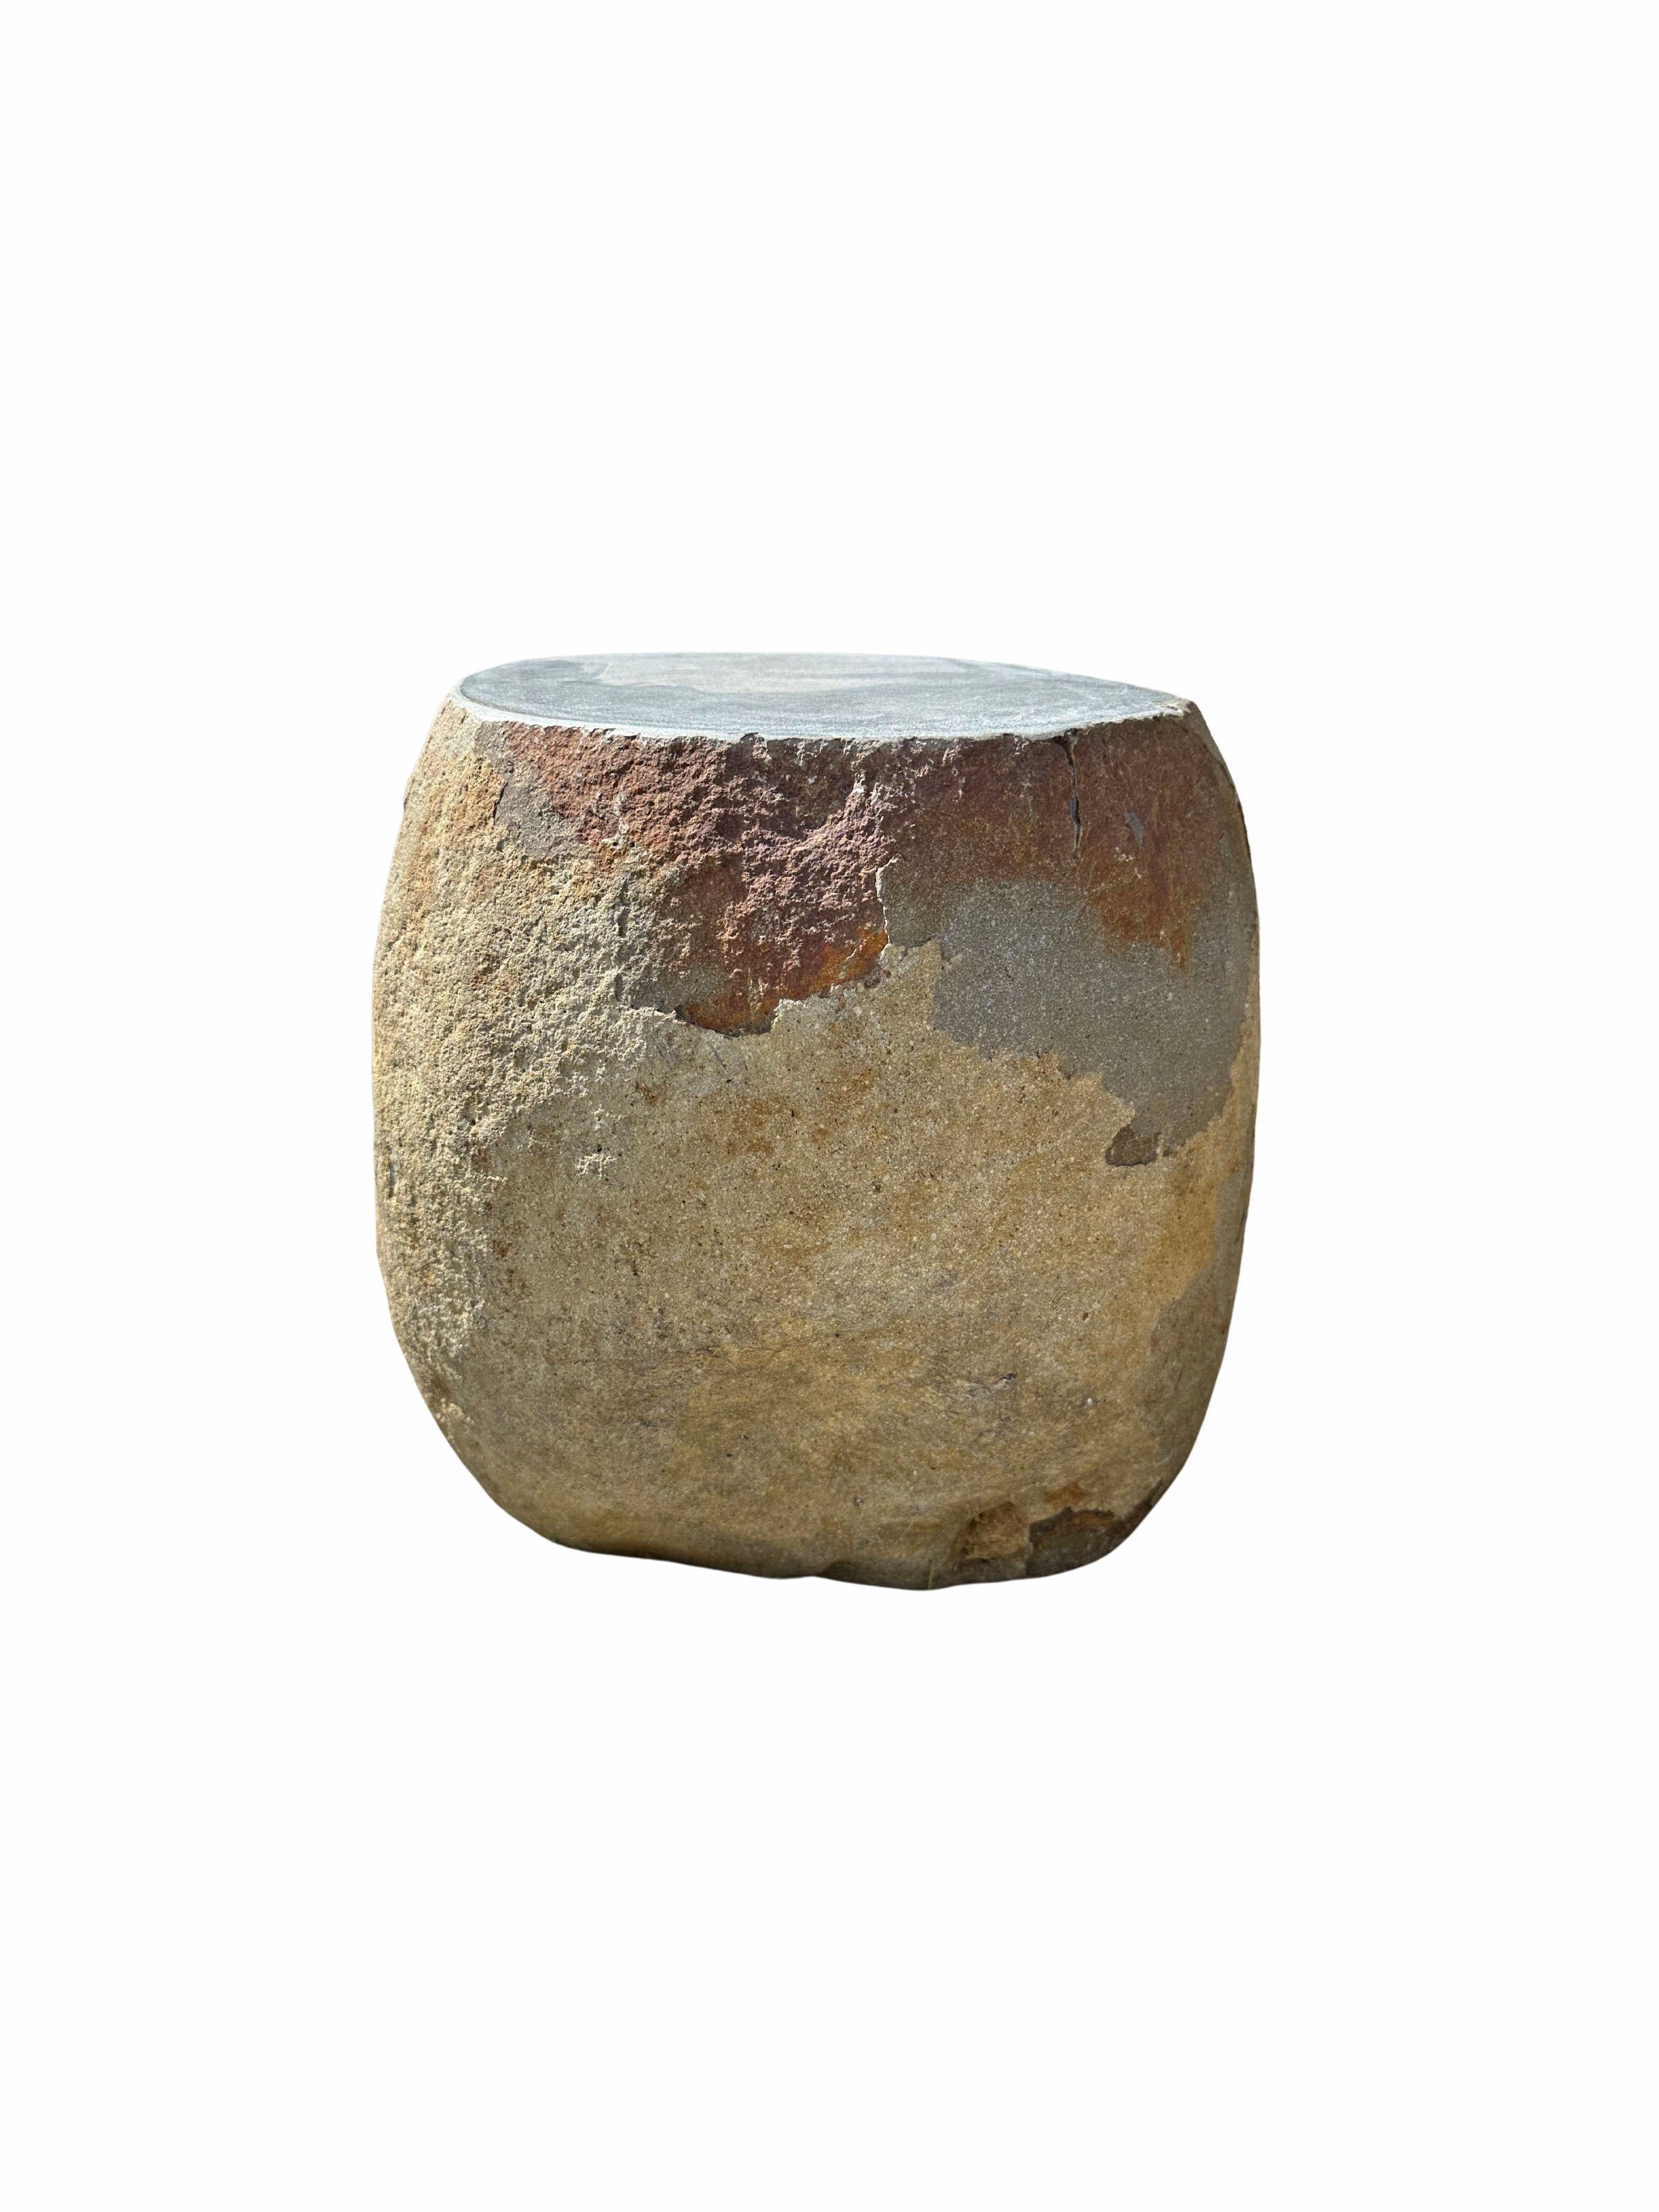 A incredibly heavy and solid rounded stone side table / pedestal. This lovely sculptural object was crafted from a solid stone sourced from a river bed in East Java. A raw and organic object with beautiful textures. Its top side was carved, sanded